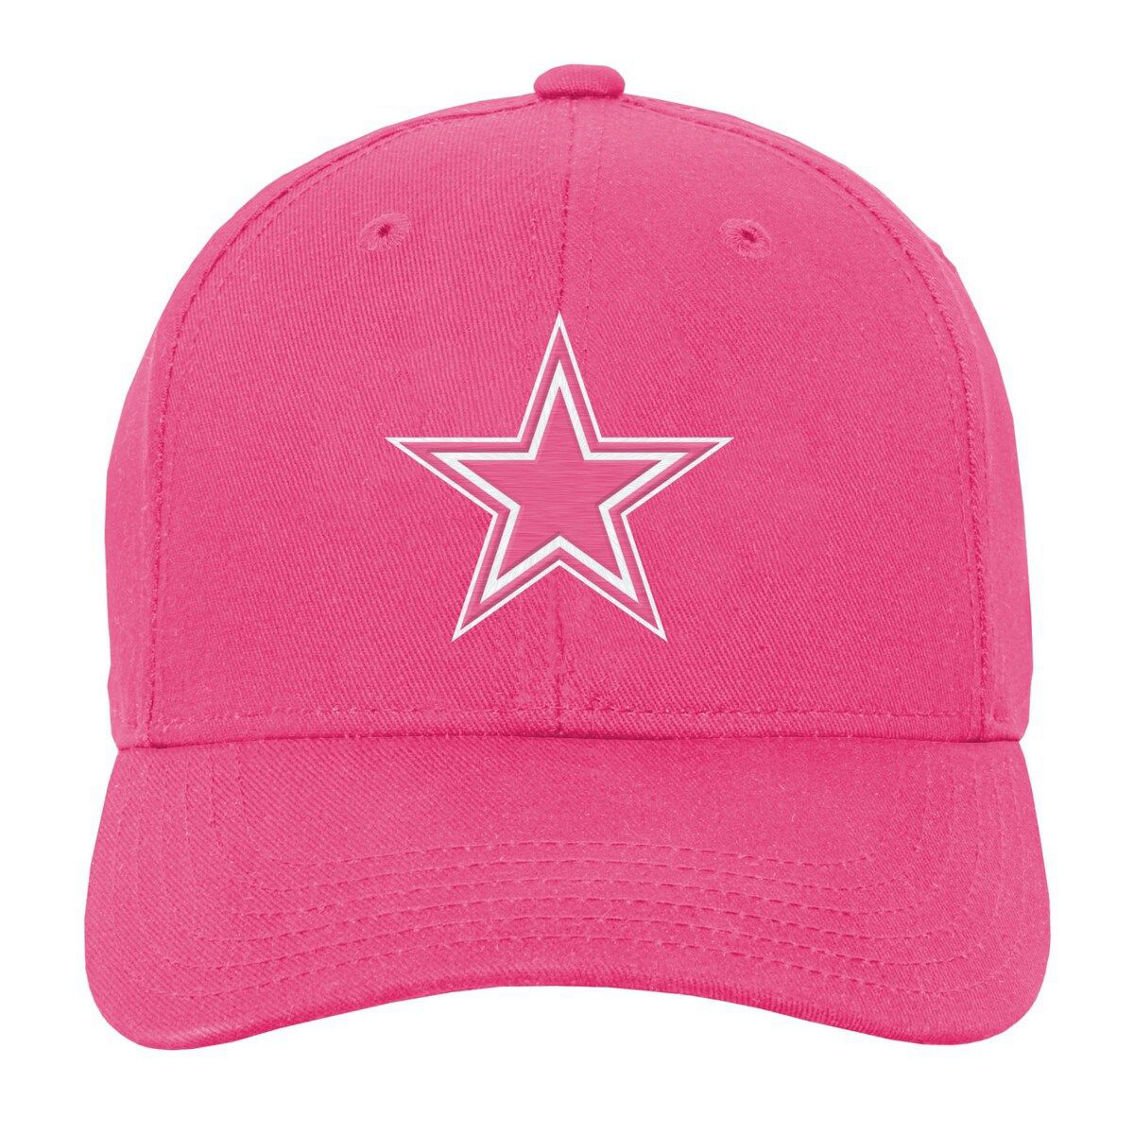 Outerstuff Girls Youth Pink Dallas Cowboys Adjustable Hat - Image 3 of 4